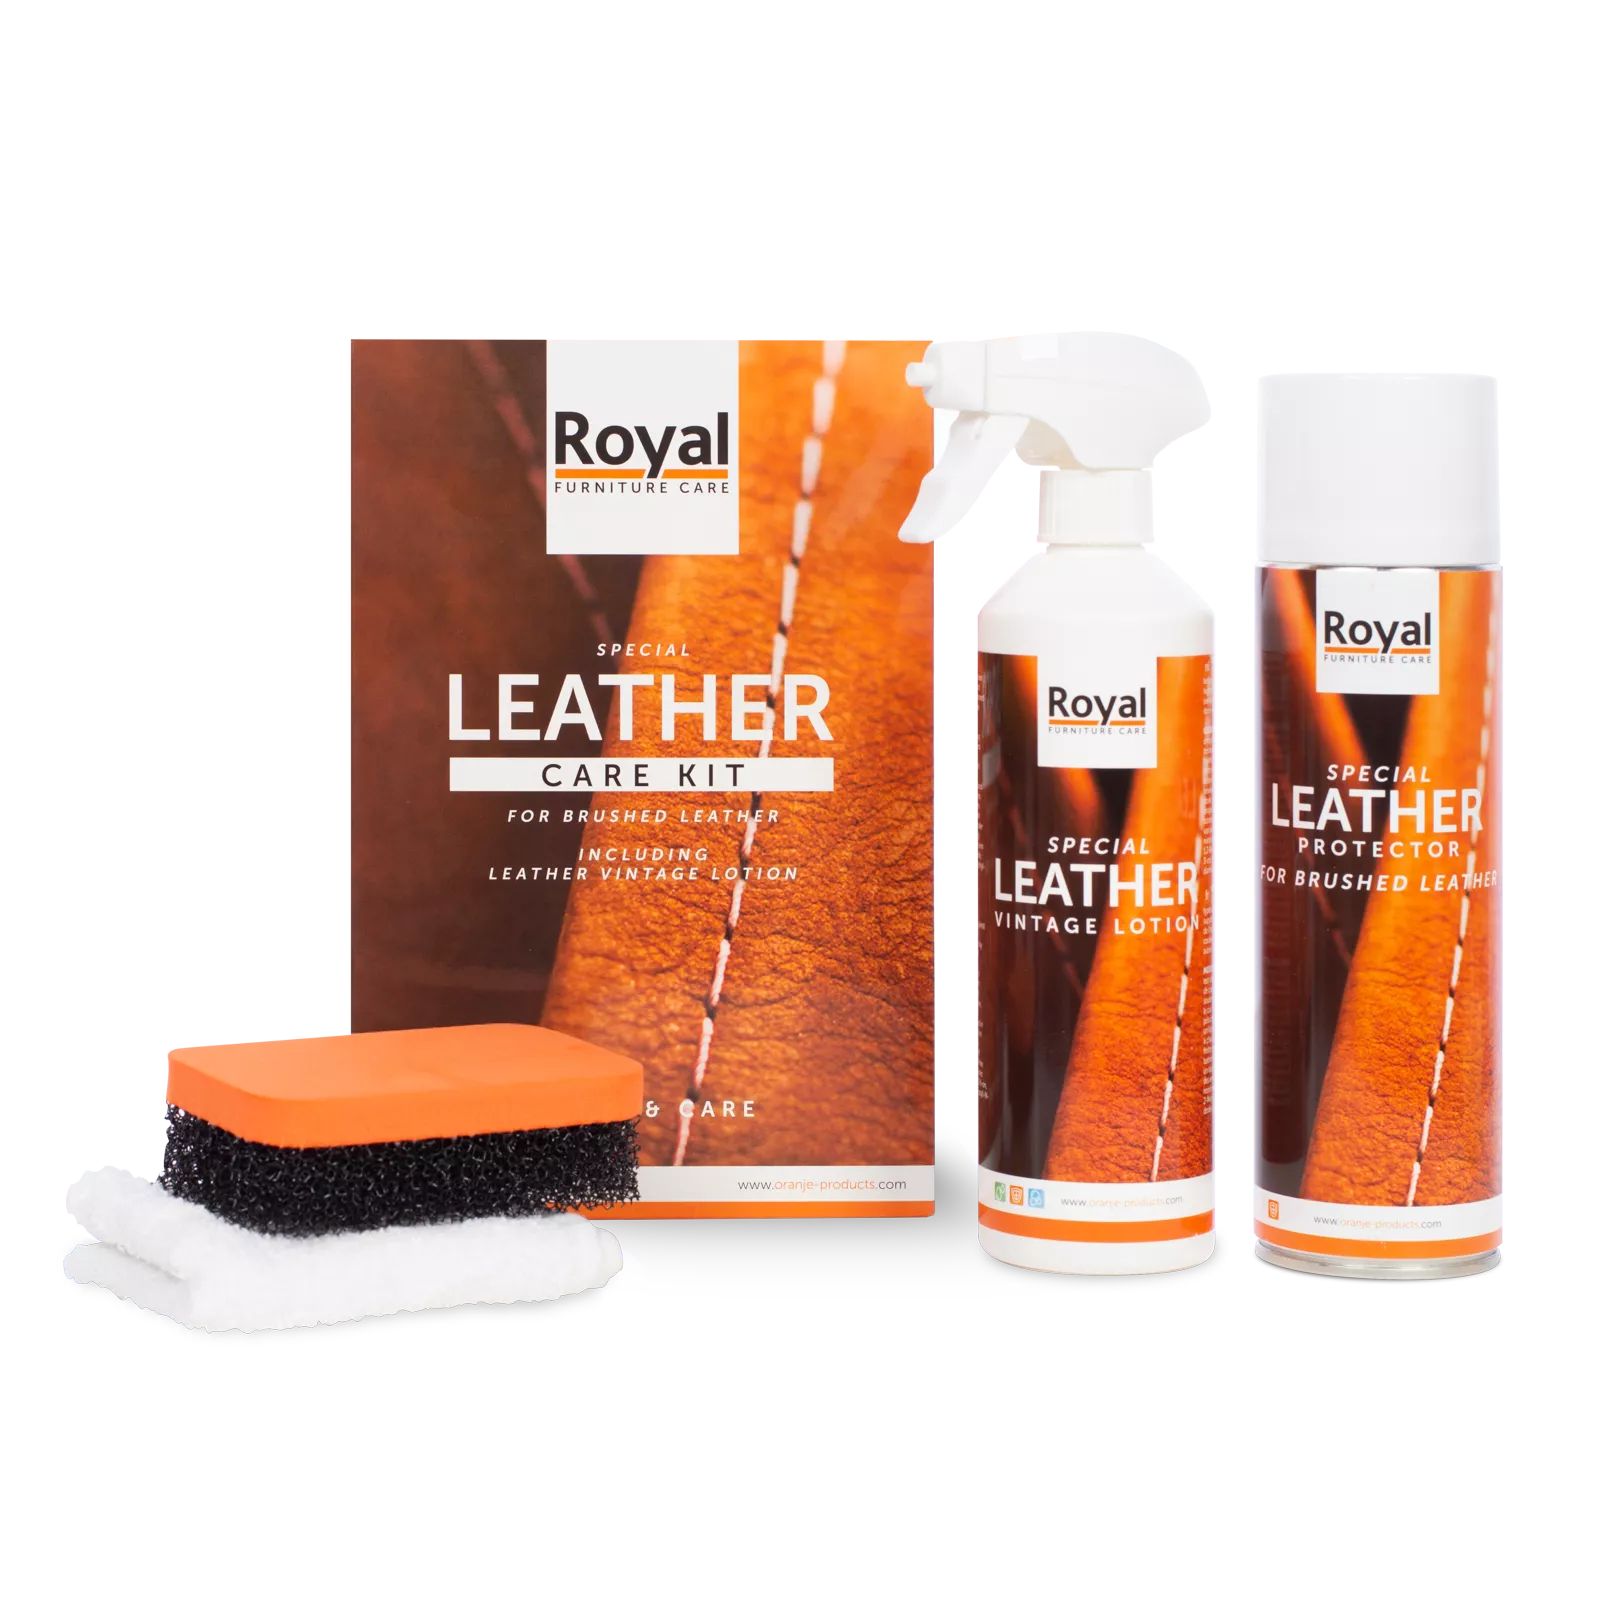 Fixx open Leather care kit